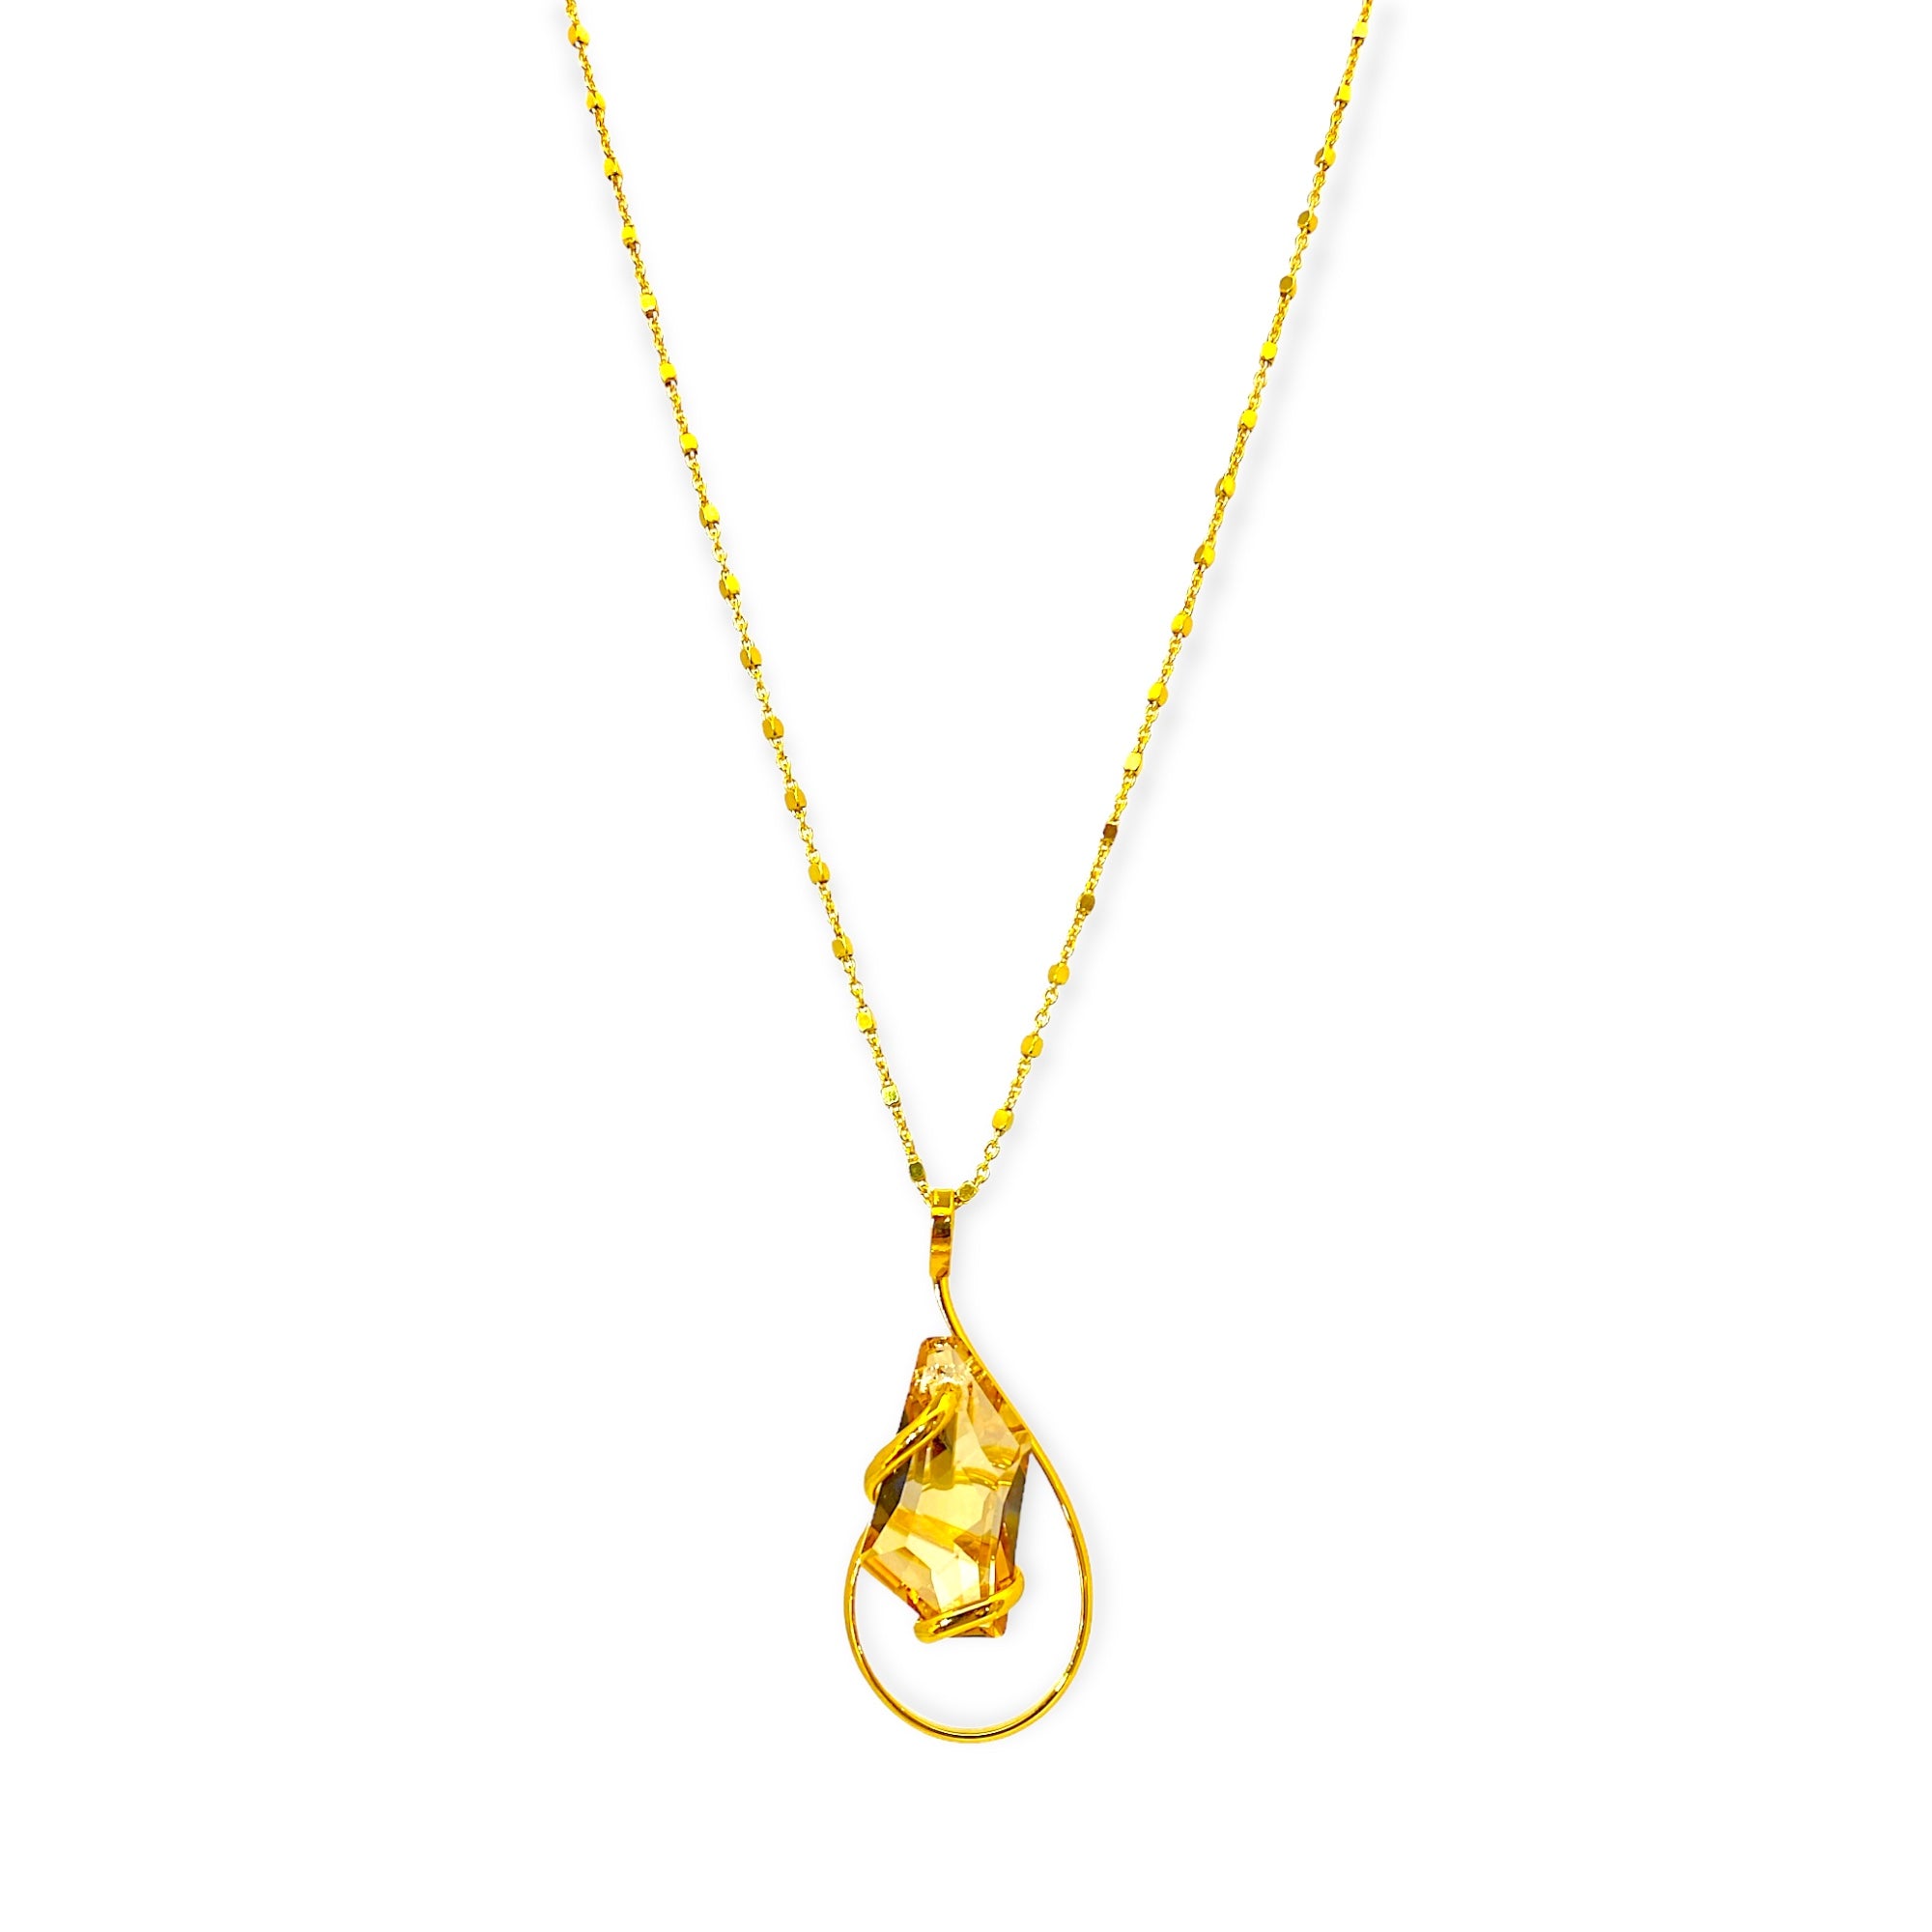 GOLDEN-SHADOW SMALL NECKLACE